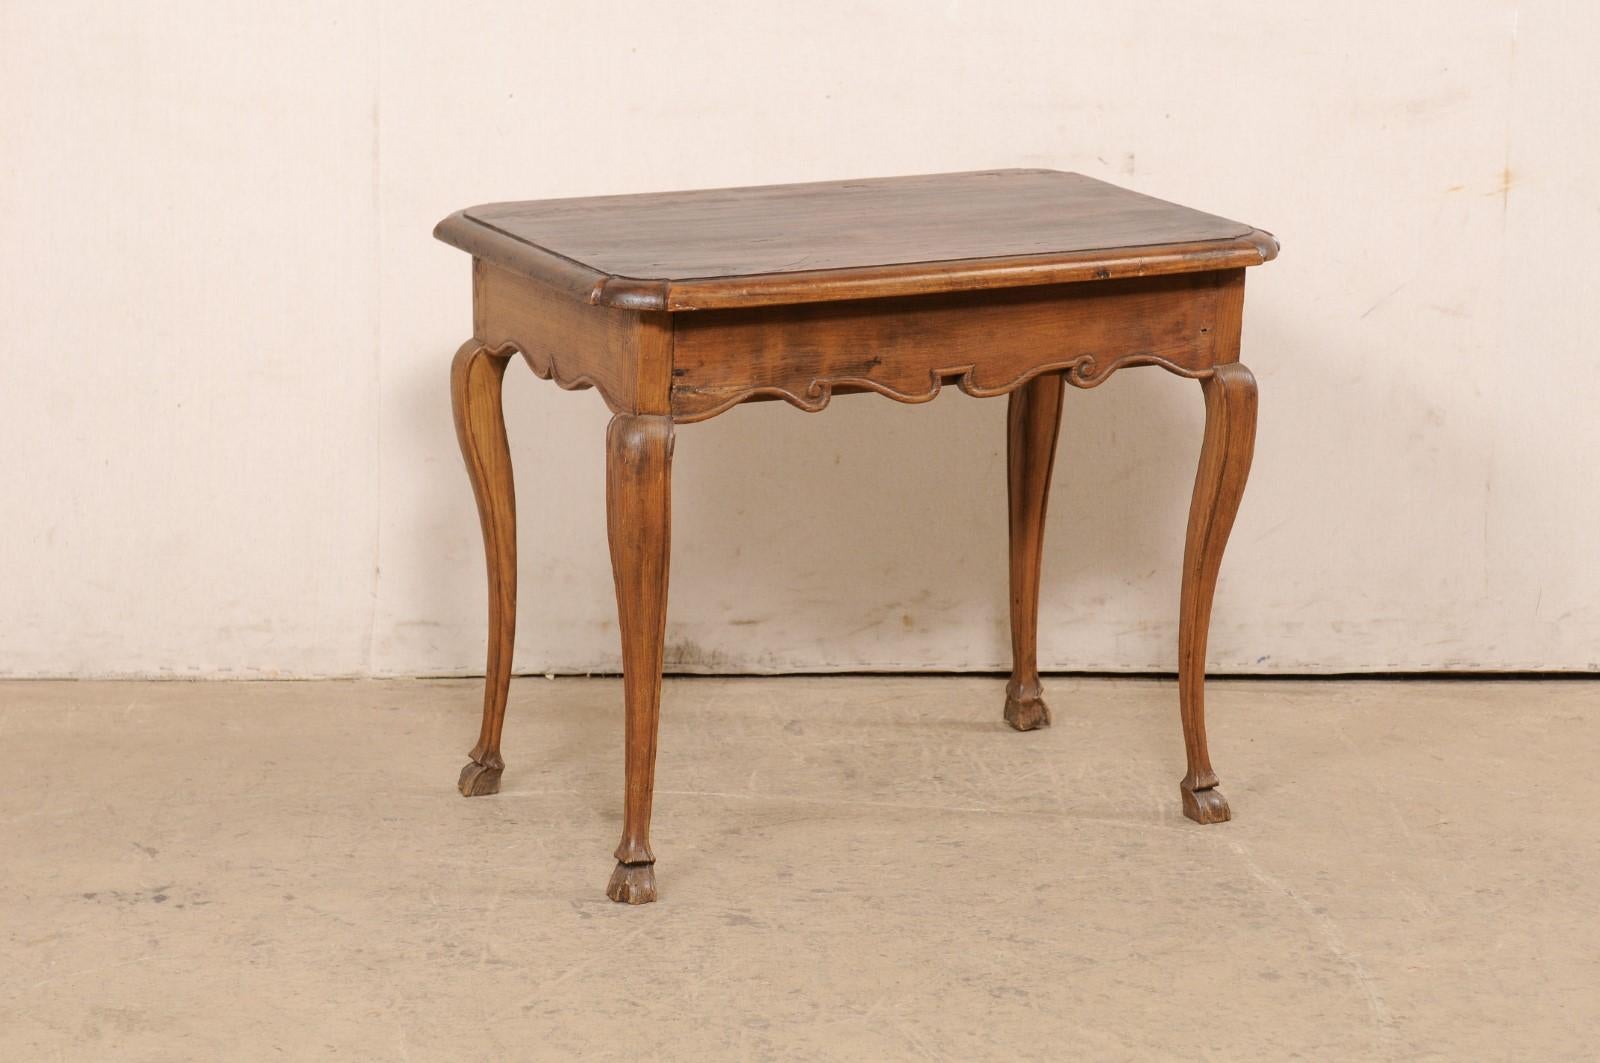 A French carved-wood occasional table with drawer from the 19th century. This smaller-sized antique table from France has a rectangular-shaped top with rounded corners, which is slightly overhanging. The apron houses a single drawer hidden along one